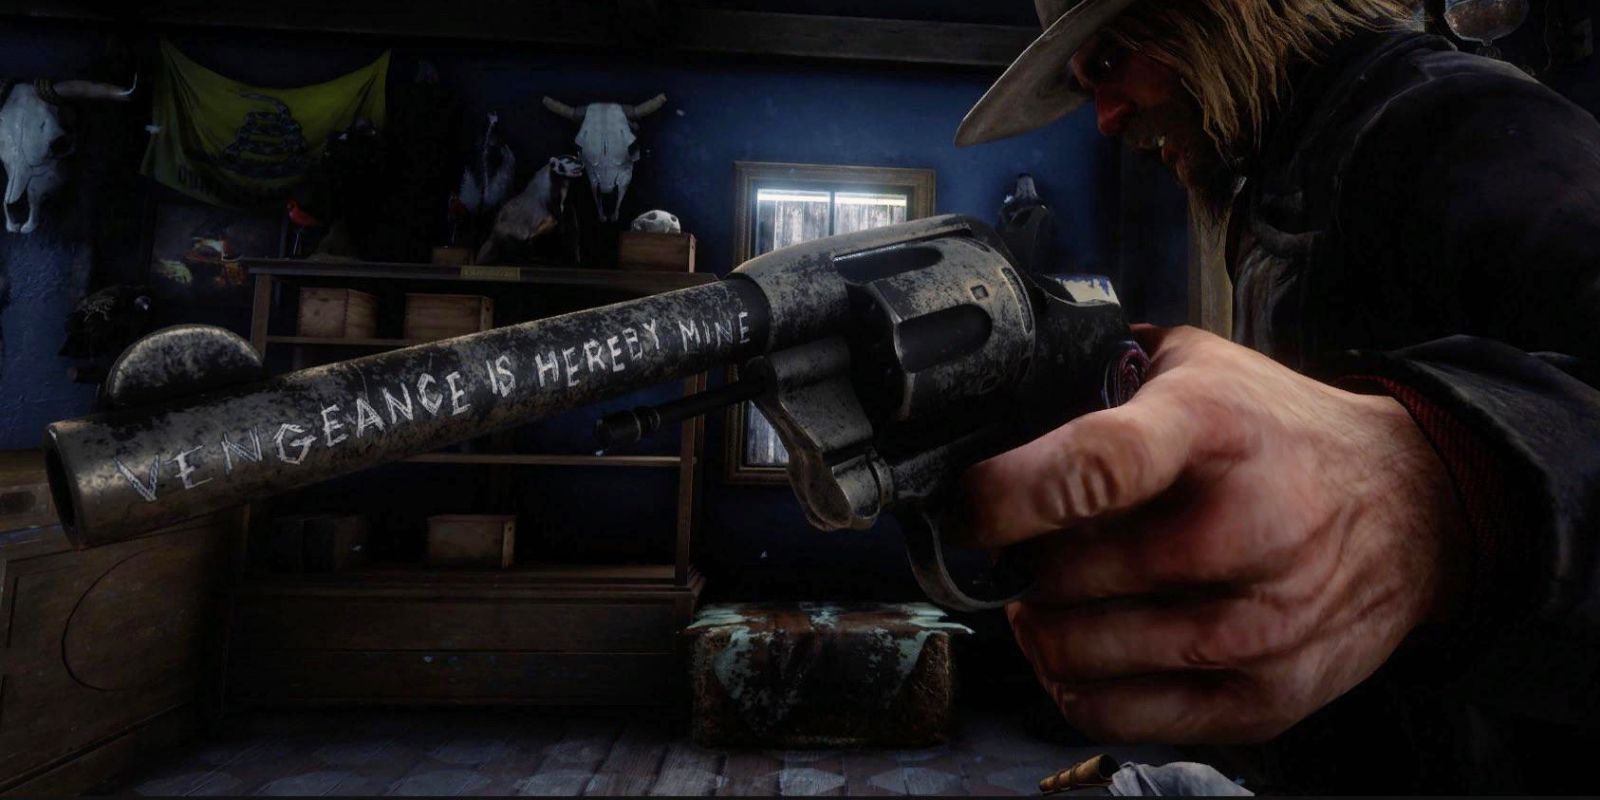 Micah has a Double-Action Revolver with &quot;Vengeance is hereby mine&quot; etched into the barrel